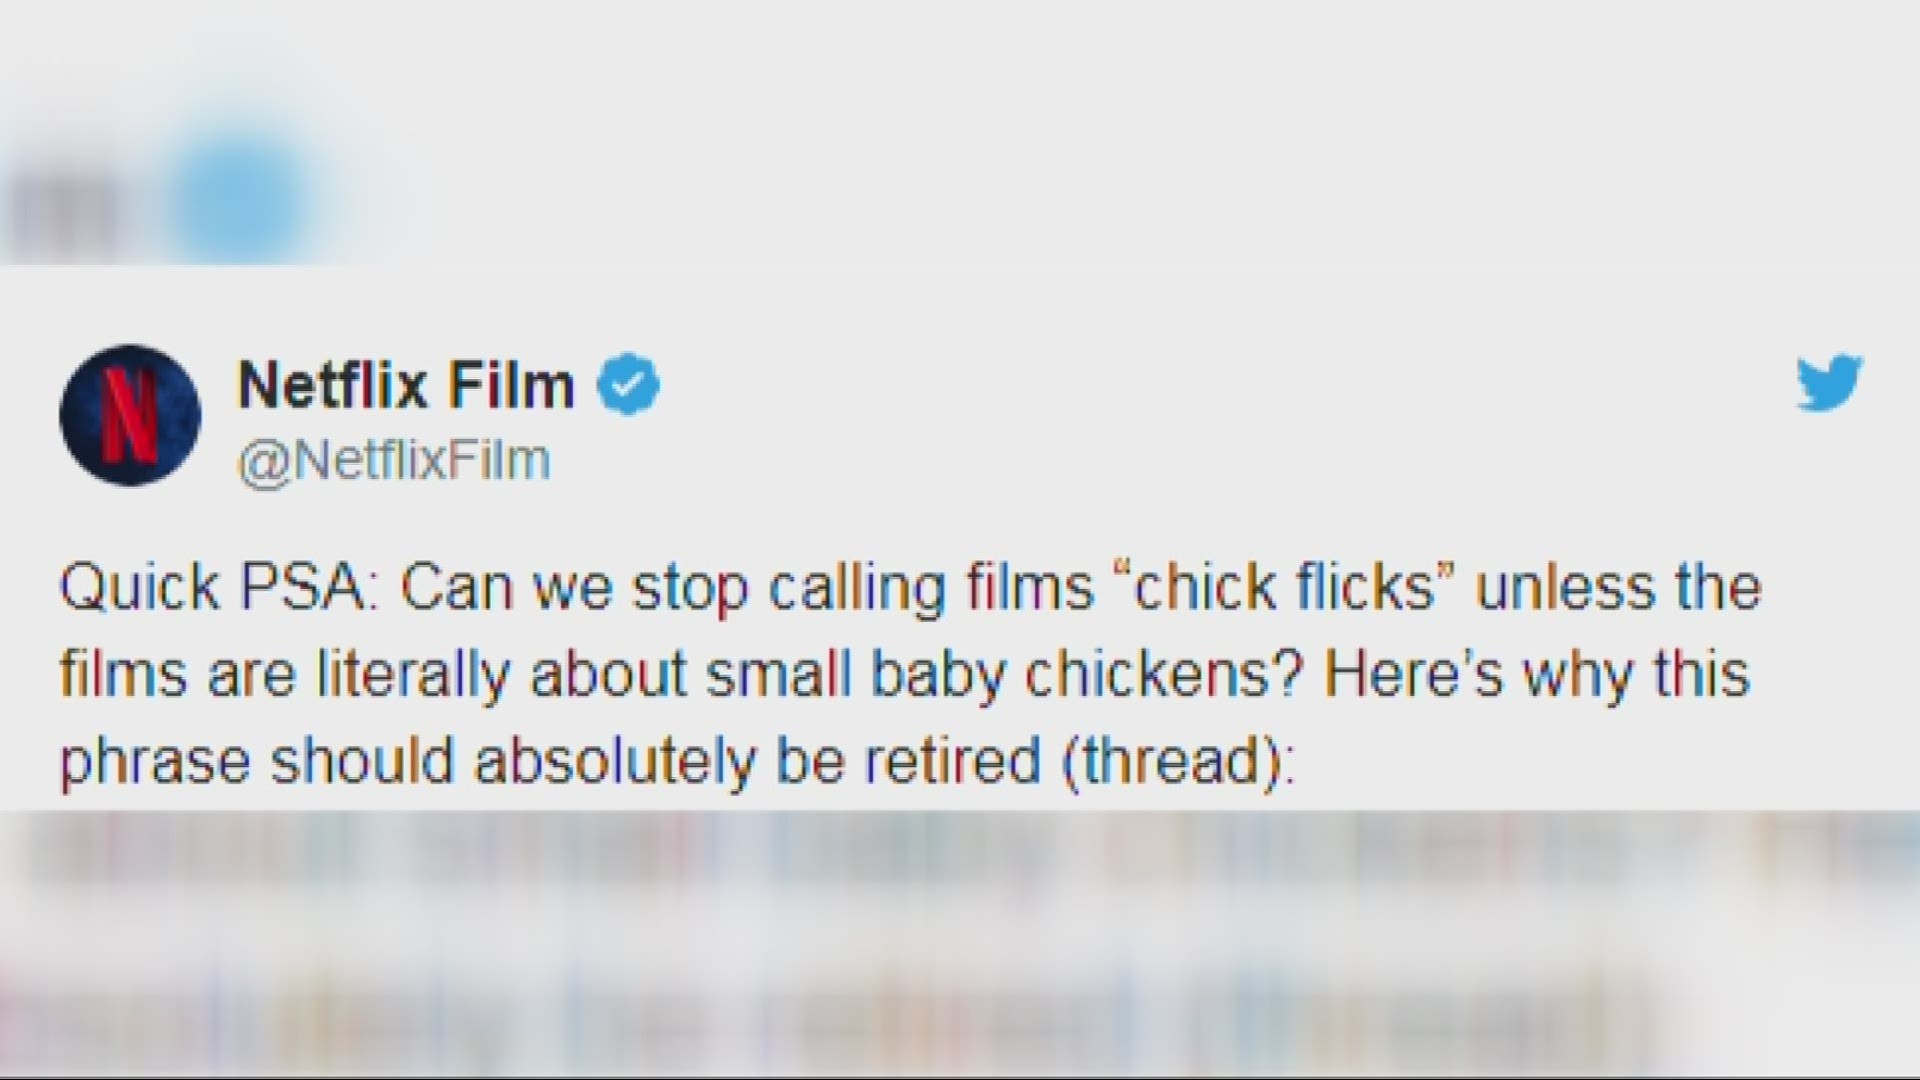 Chick flicks. We all love them. Yes, even men watch these movies. Which is why Netflix says it's time to retire the popular phrase once and for all.